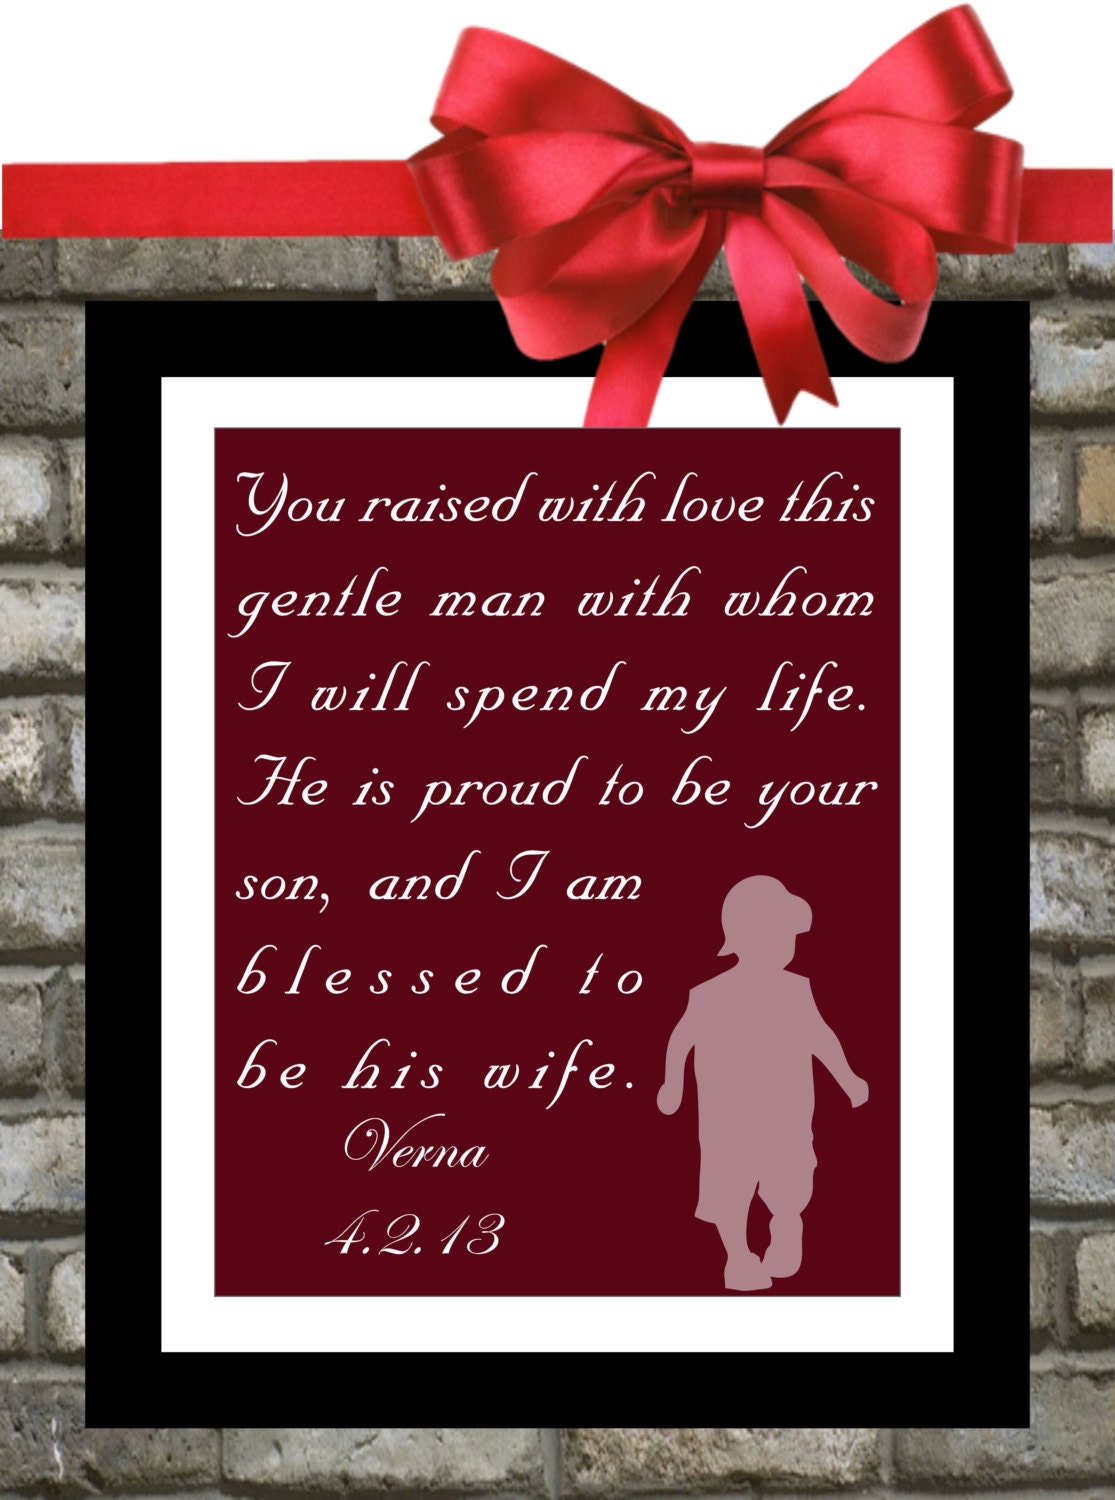 New In laws Parents Wedding Thank You Gift: Personalized For Parents